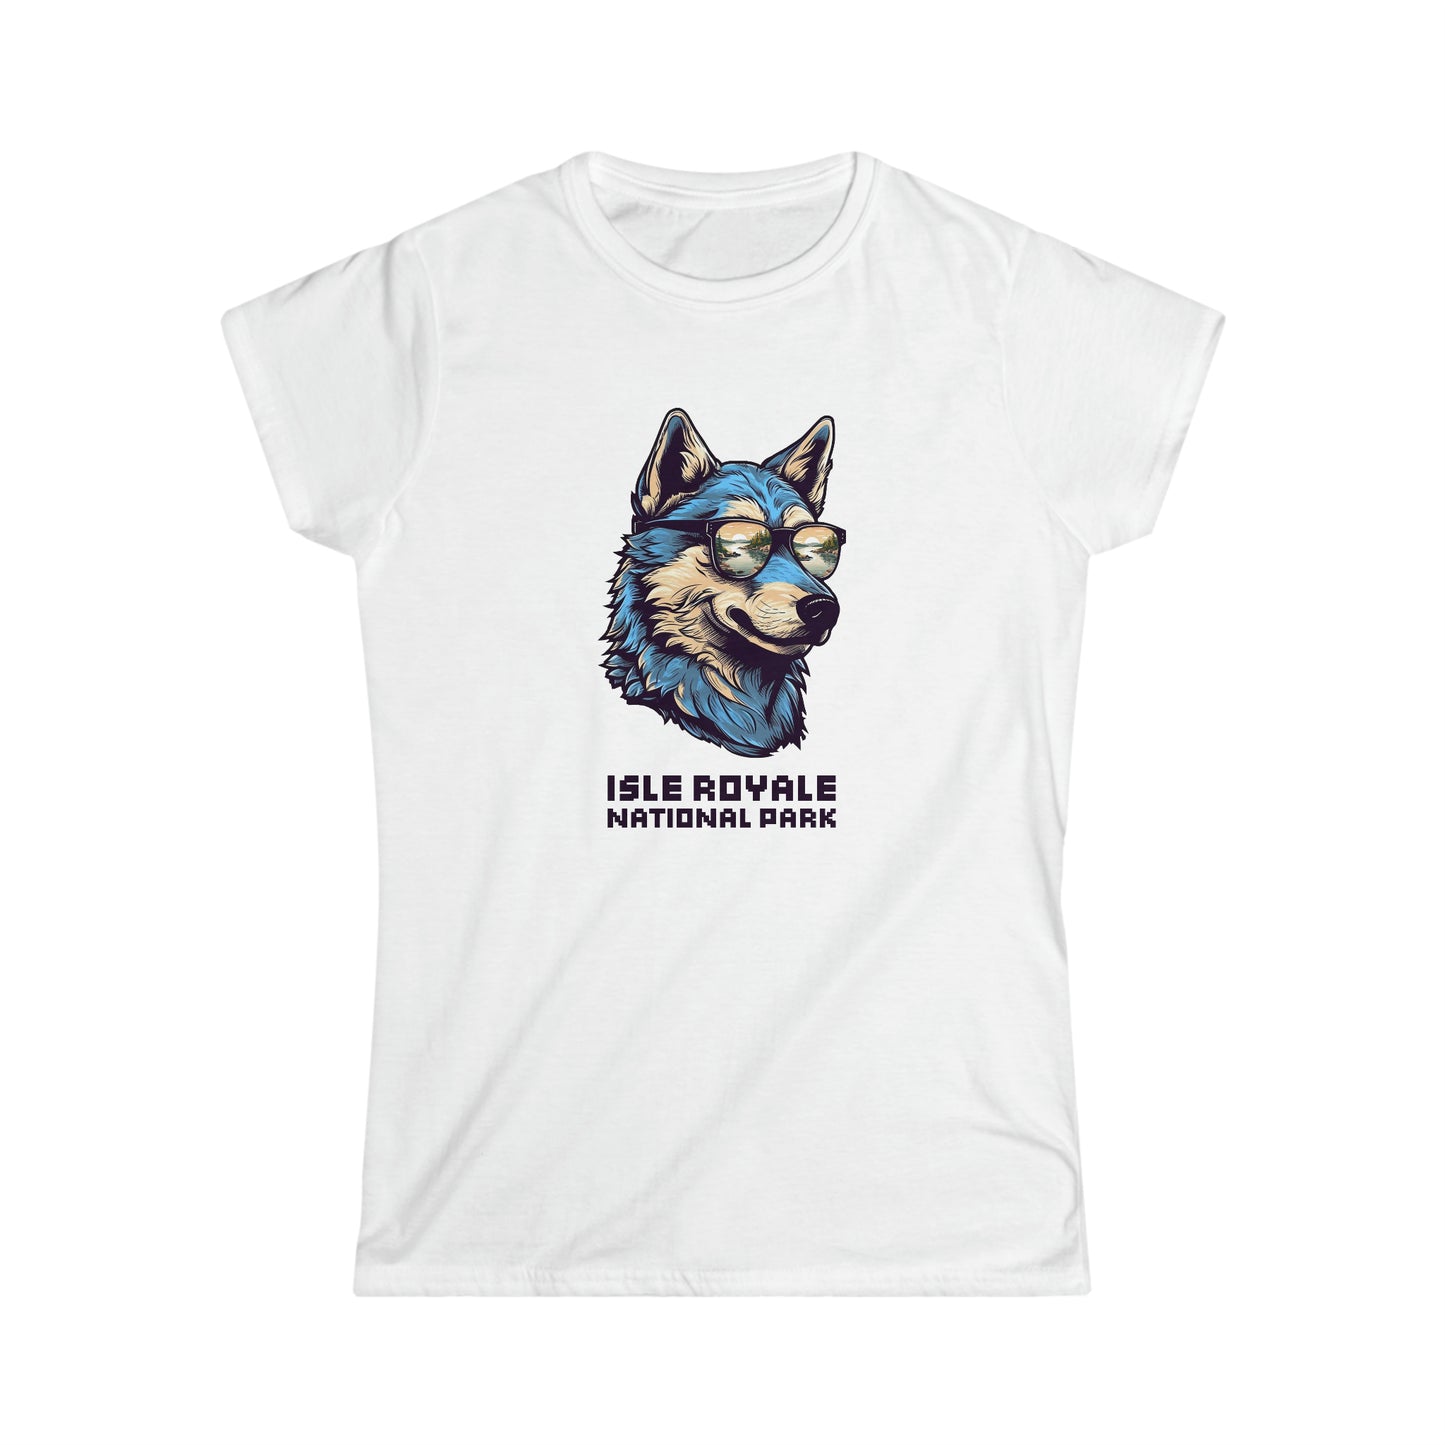 Isle Royale National Park Women's T-Shirt - Cool Wolf